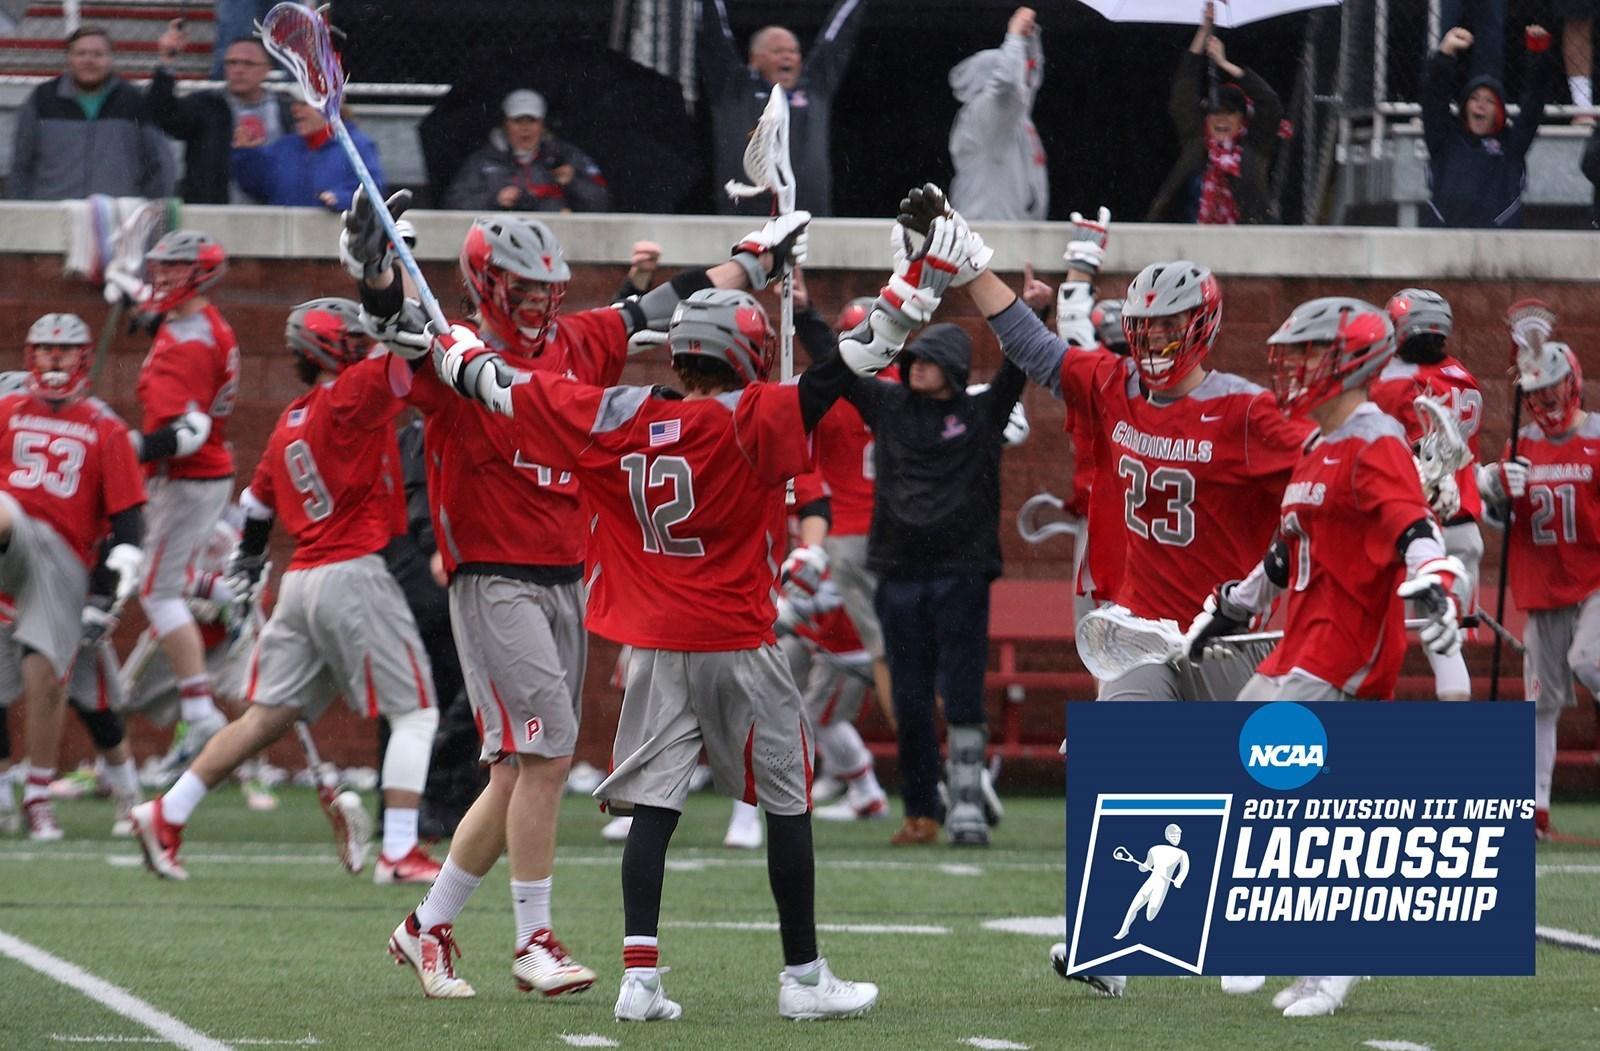 Plattsburgh Men's Lacrosse Earns First-Round Bye, Draws Bates in Second Round of NCAA Tournament